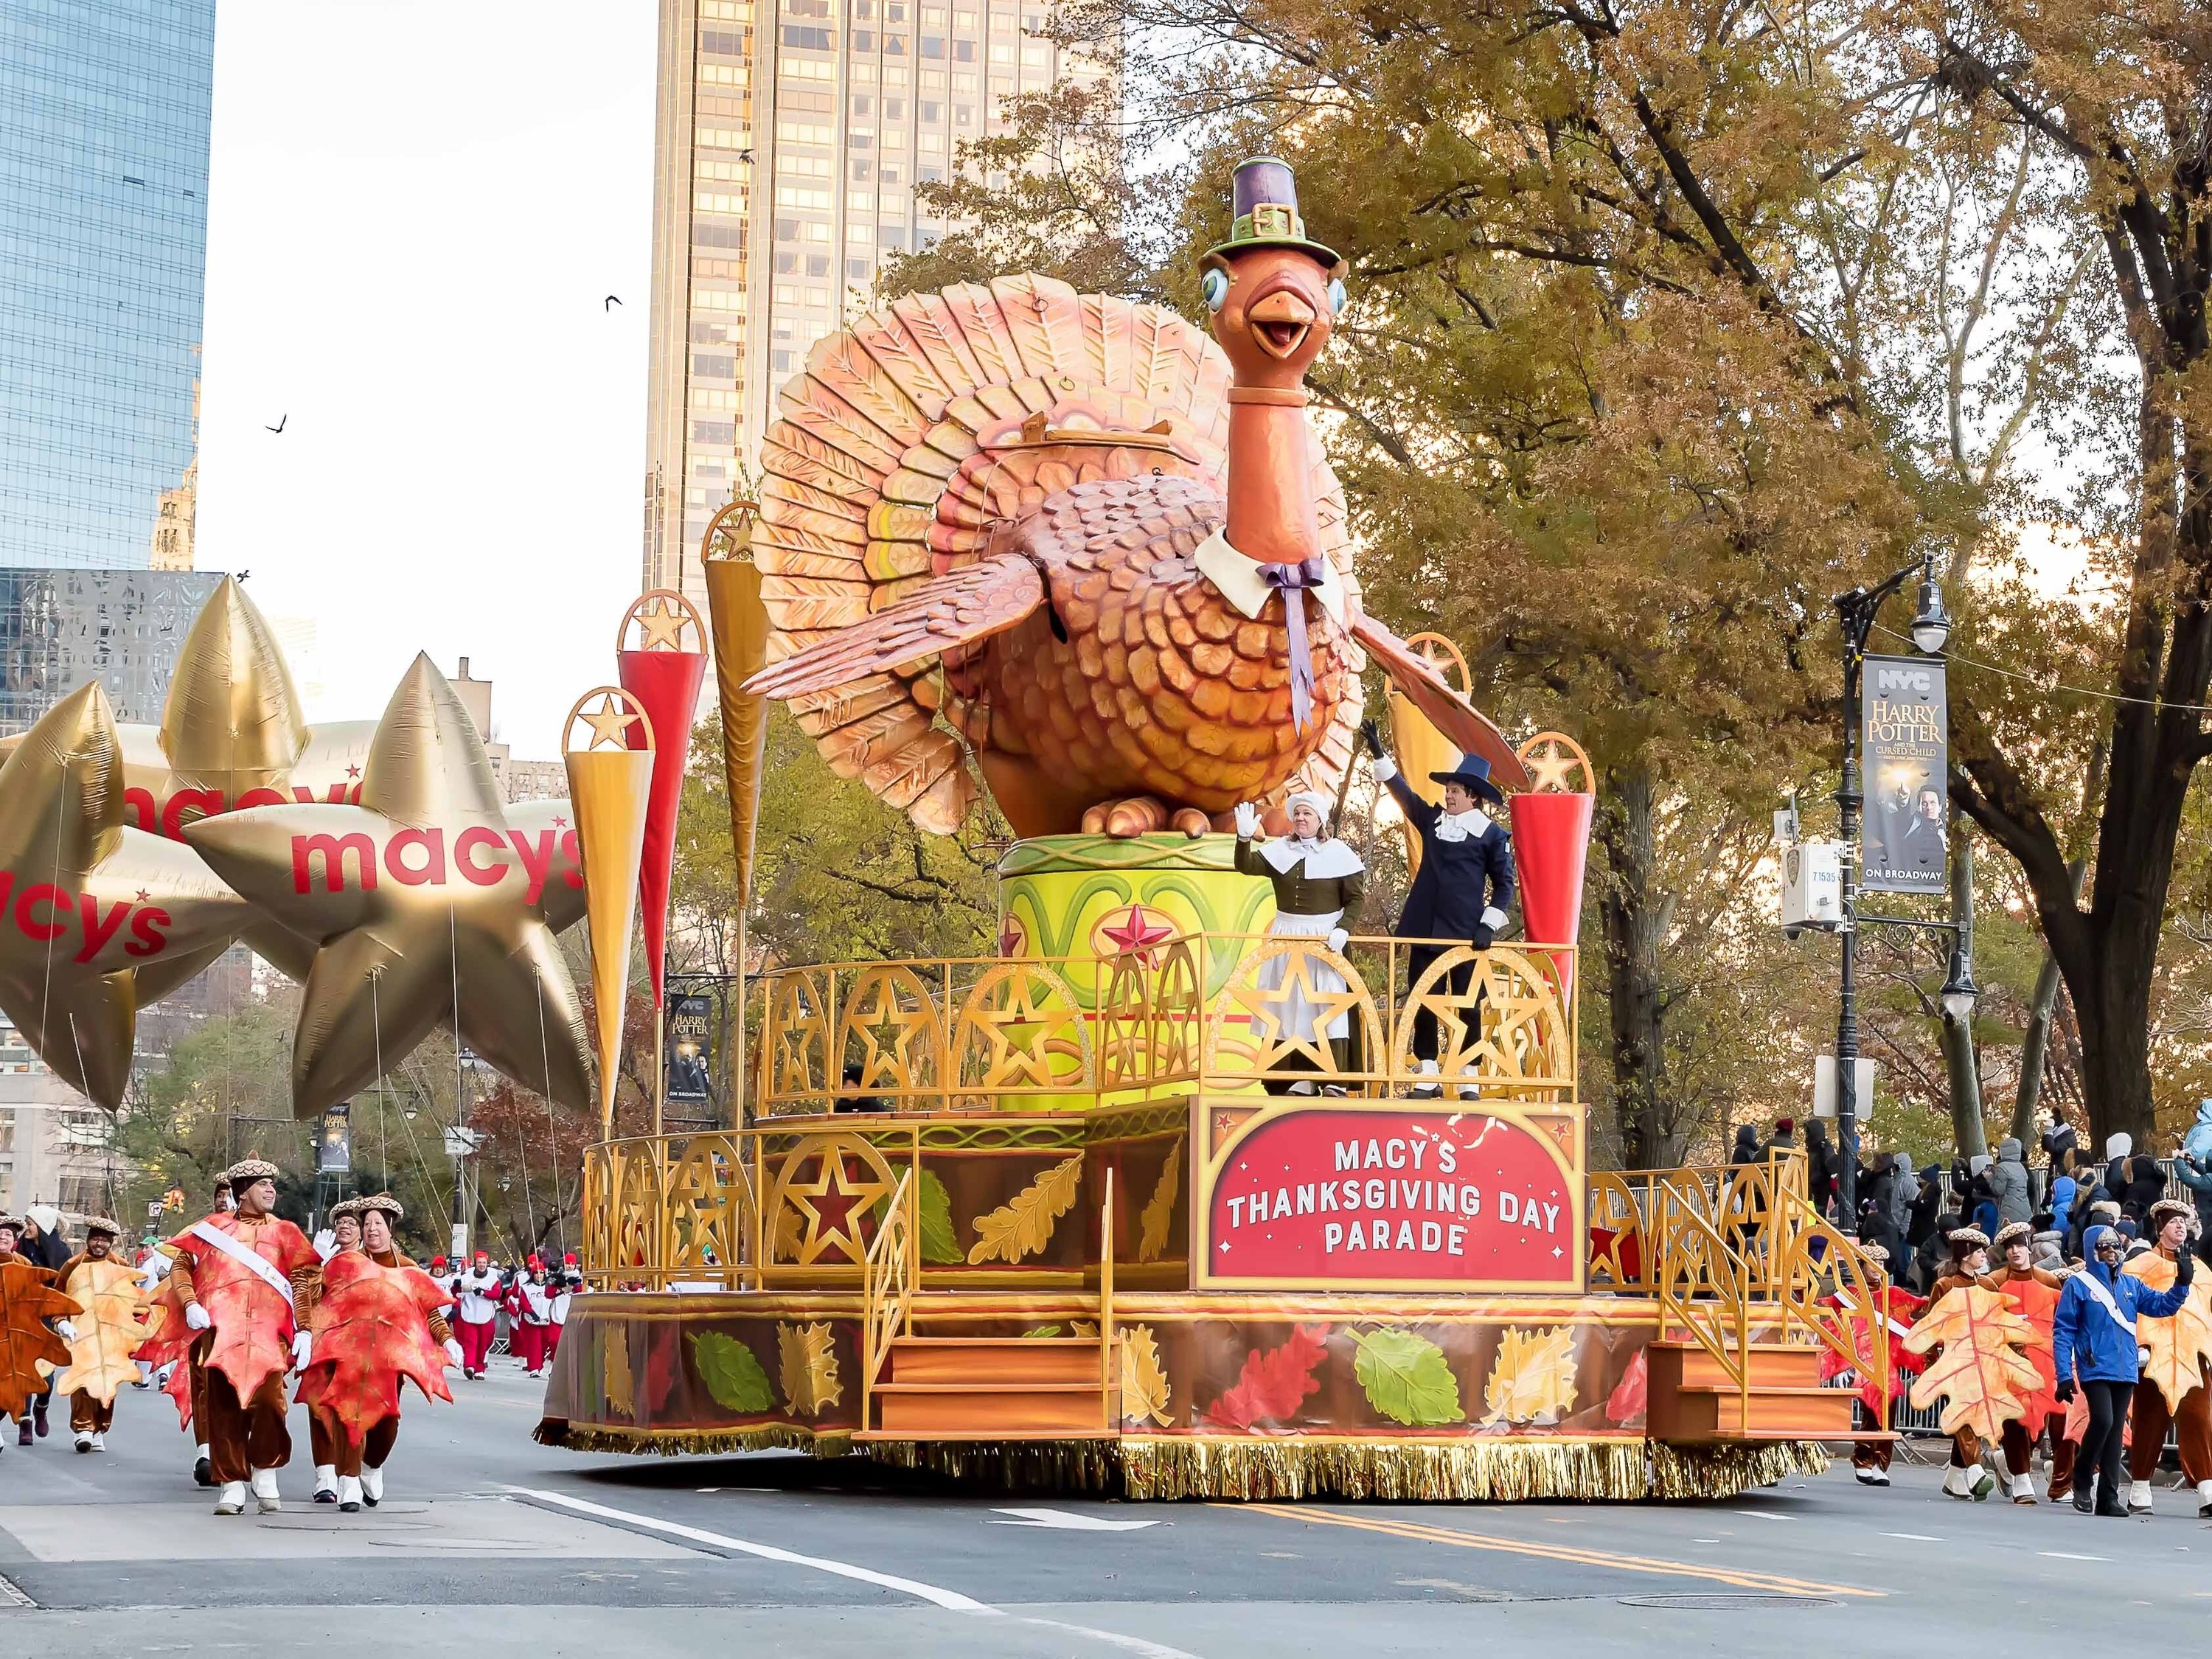 When is Thanksgiving 2023 in the US? Know What Day it is - The